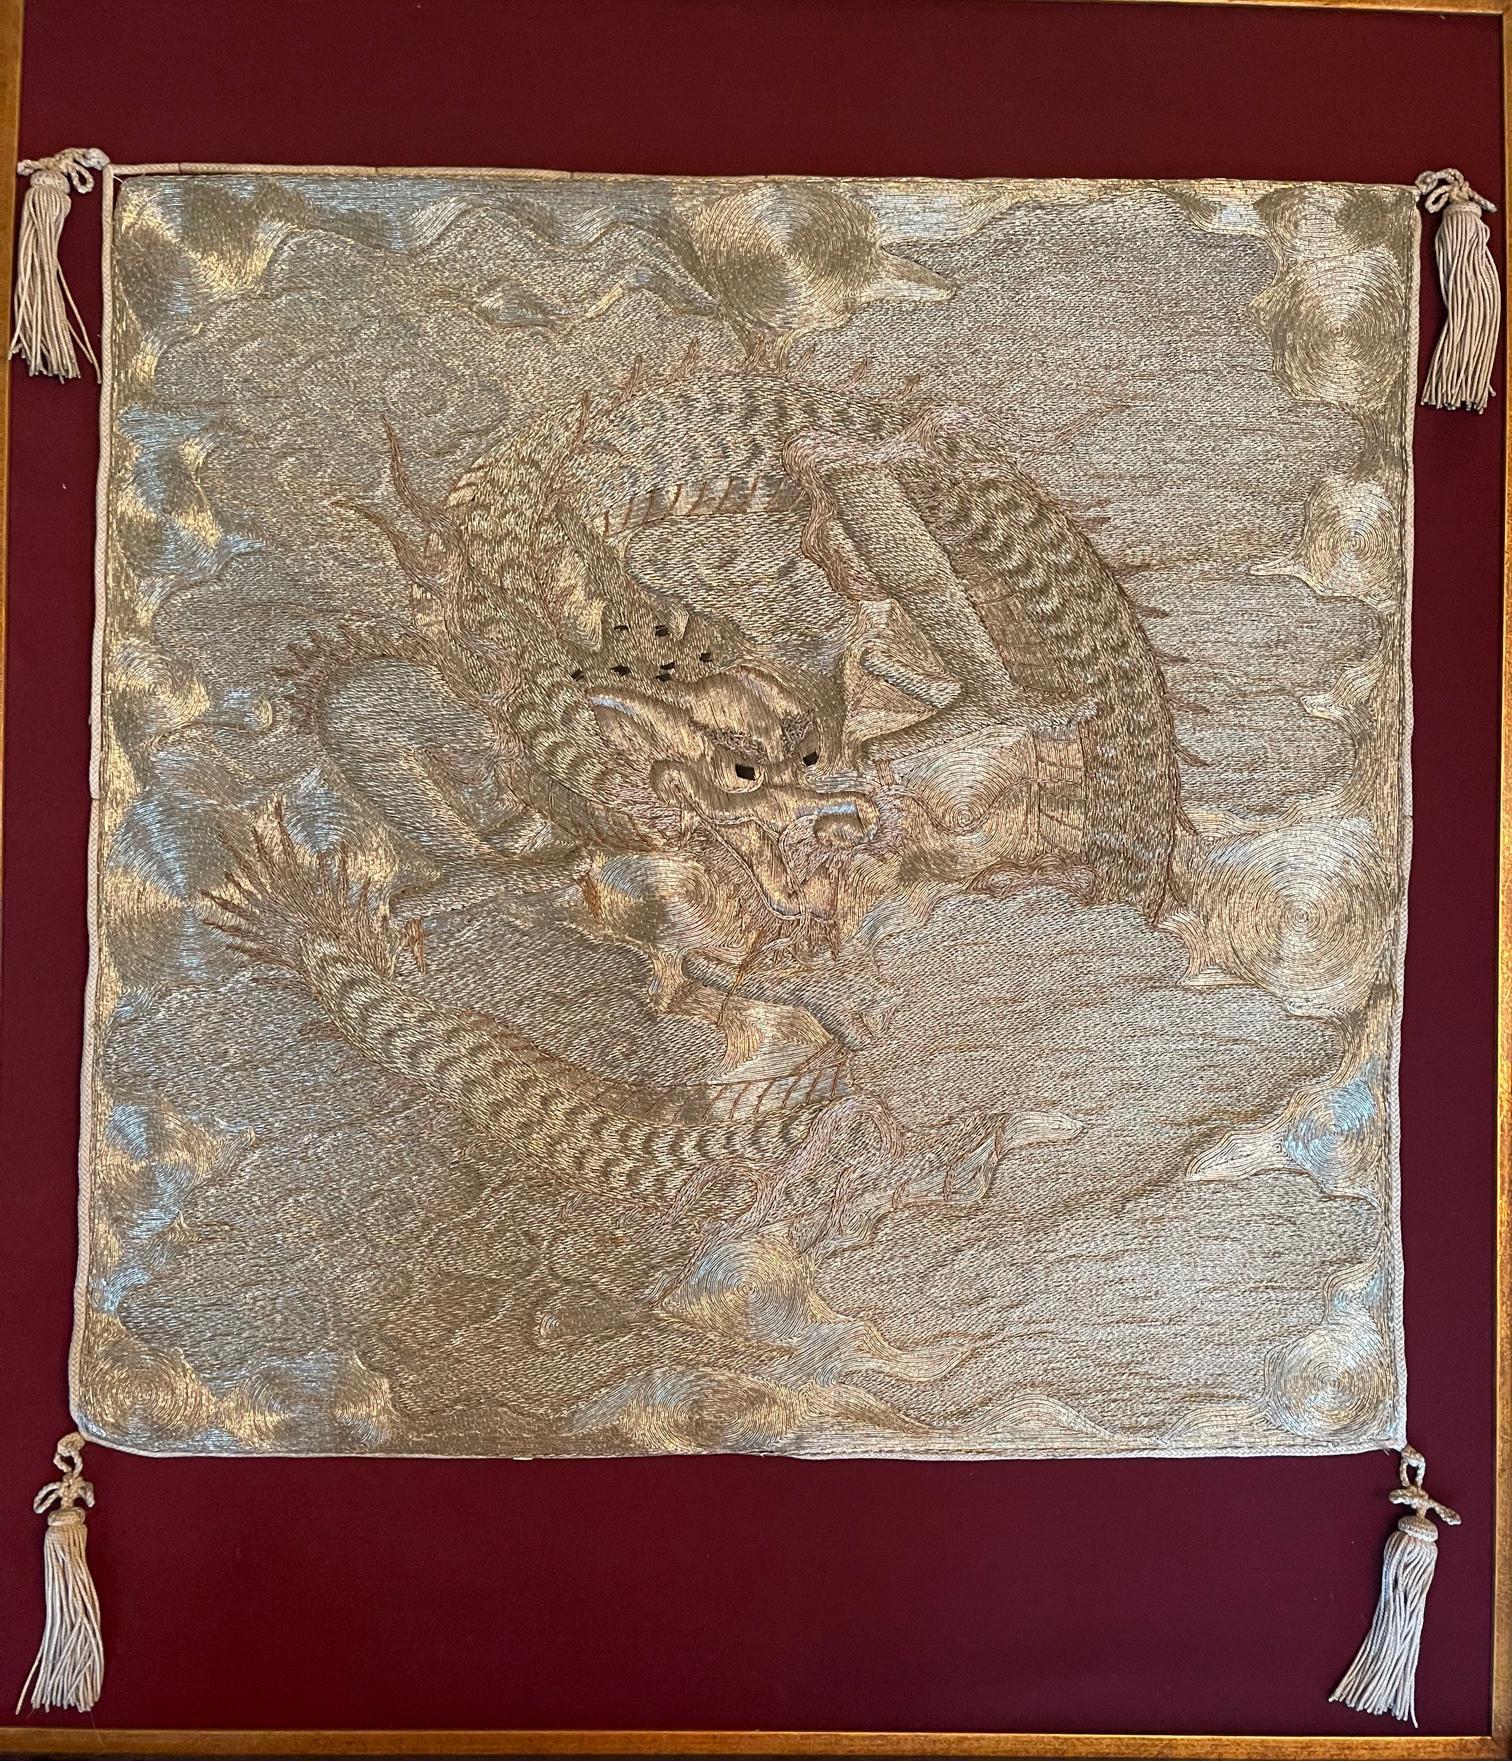 A visually stunning Japanese fukusa panel with an embroidered dragon on a swirling cloud background, nicely displayed on a scarlet felt matt in a carved black wood frame with an antique-finish rose gold trim. This piece of textile art is likely